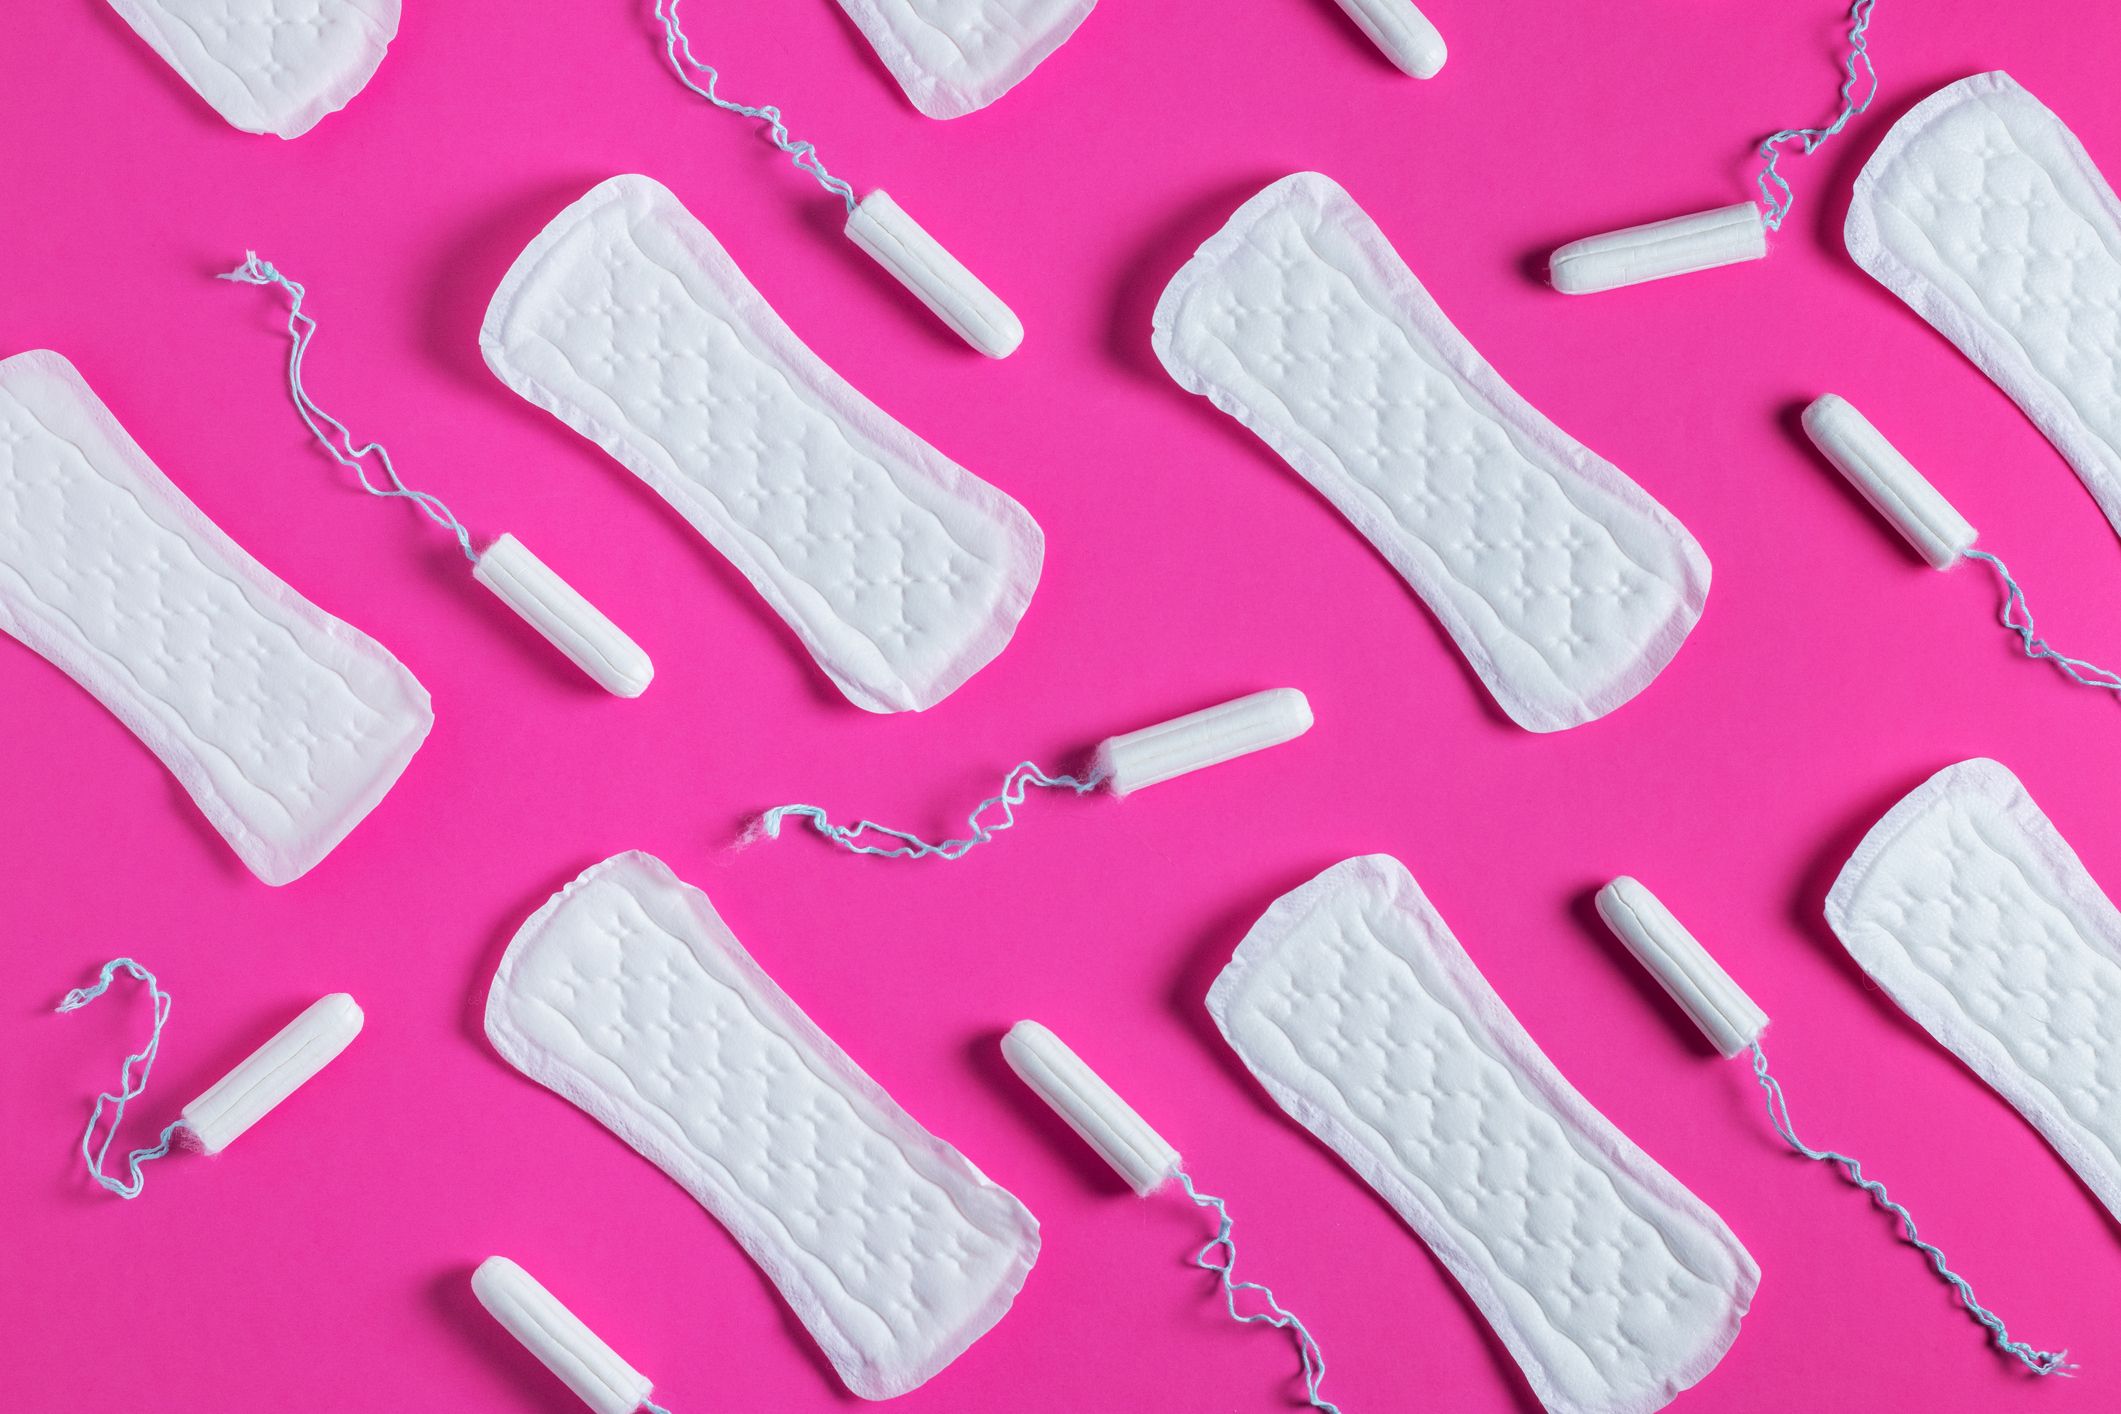 Why Menstrual Pants Can Solve All Our Period Problems